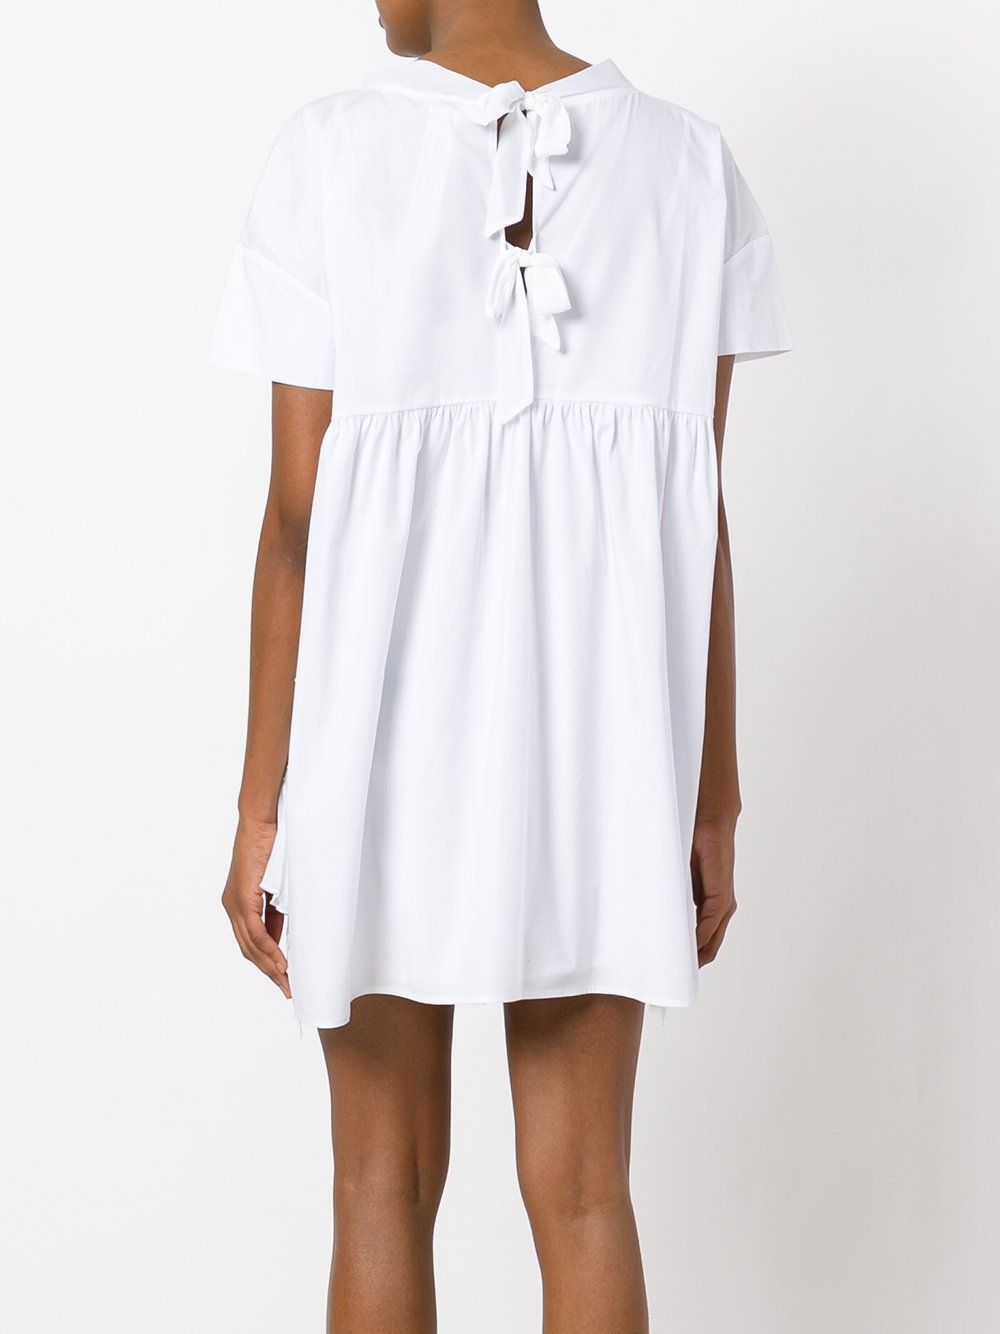 Twin set in the outlet ... twin-set pleated trim lace dress 001 bianco ottico women clothing day  dresses,twin ... DLBHIKJ